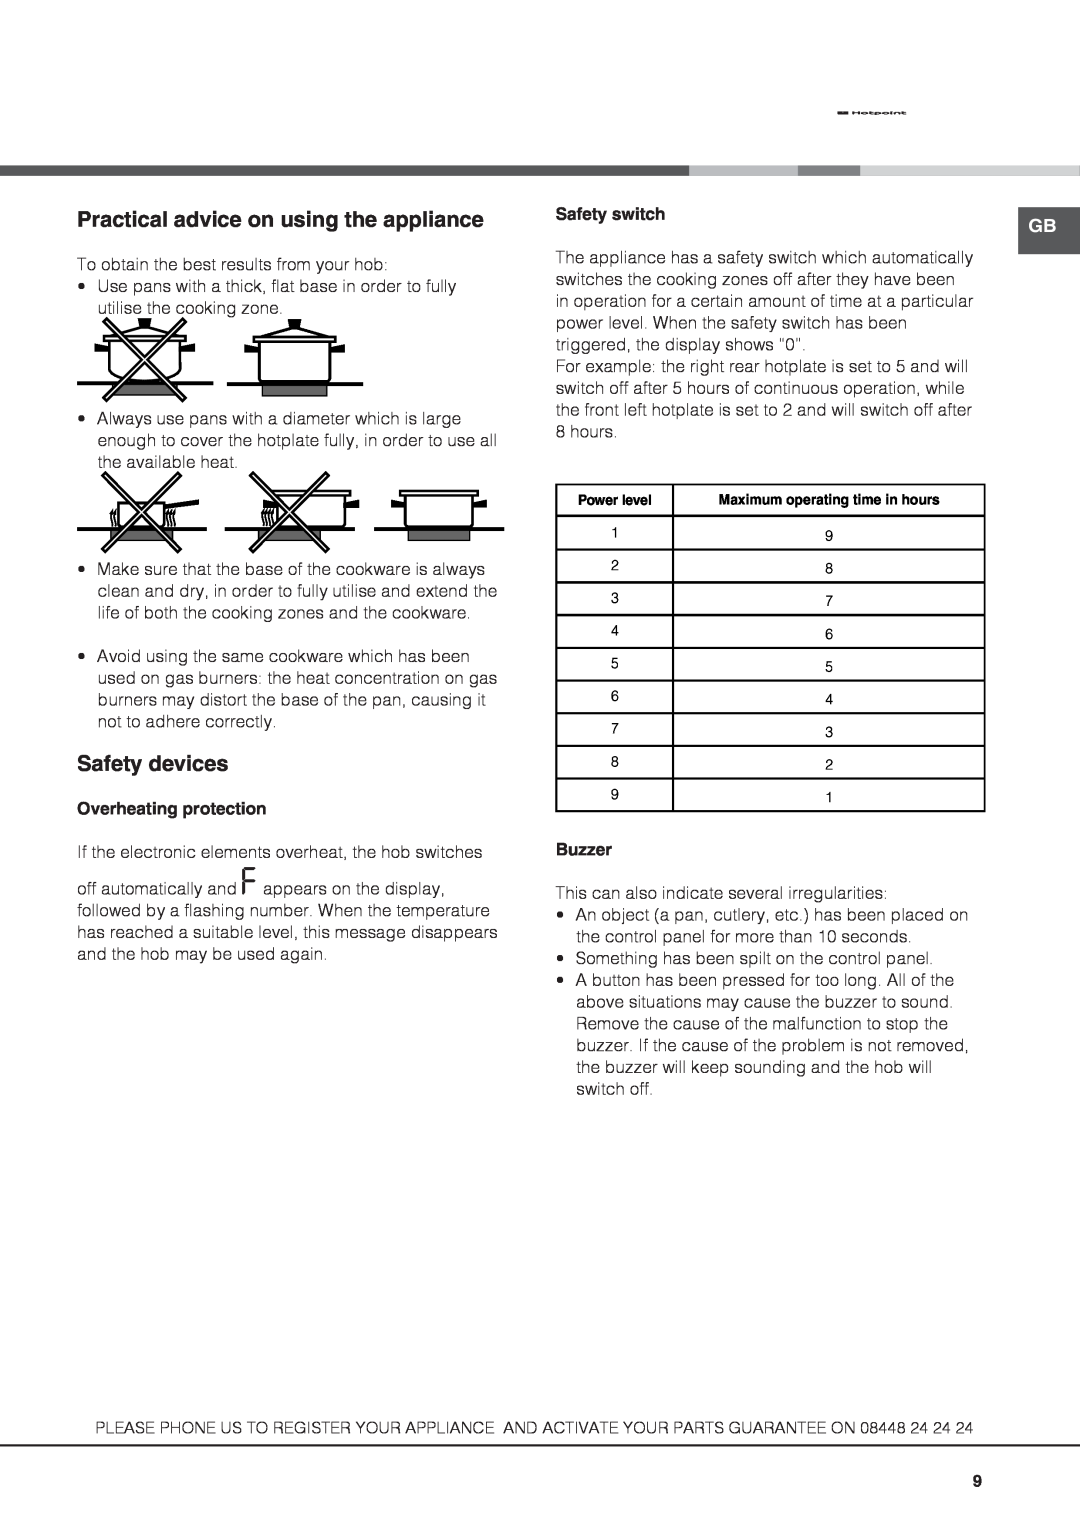 Hotpoint CBRA 640 X S manual Practical advice on using the appliance, Safety devices, Overheating protection, Safety switch 